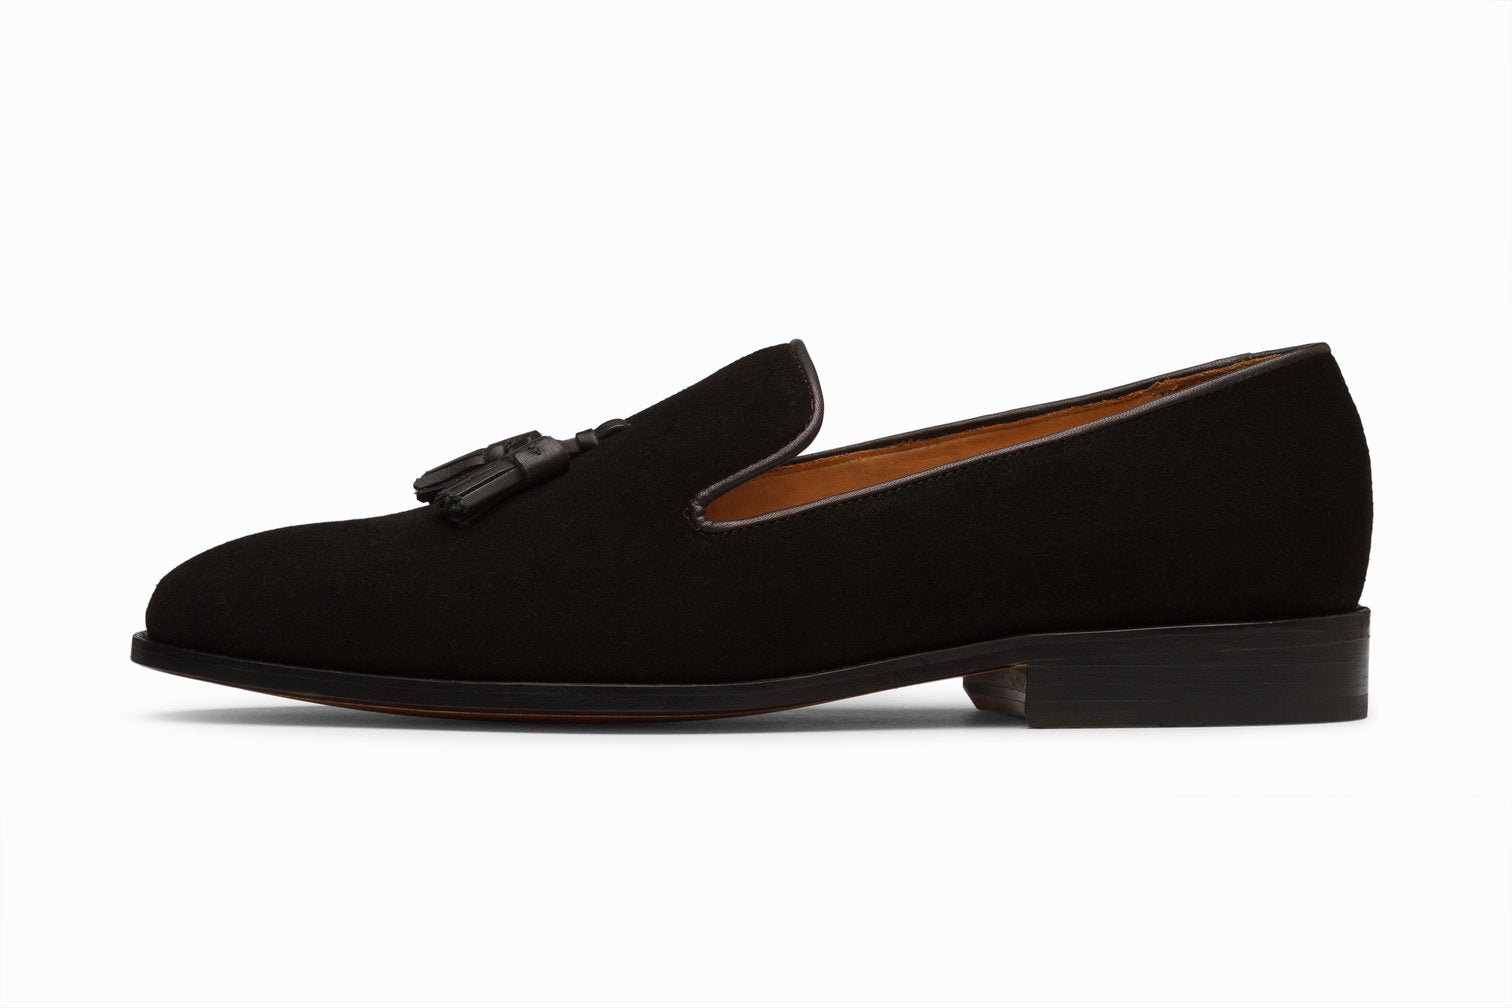 Tessel loafers black suede, formal shoes for men in Dubai.